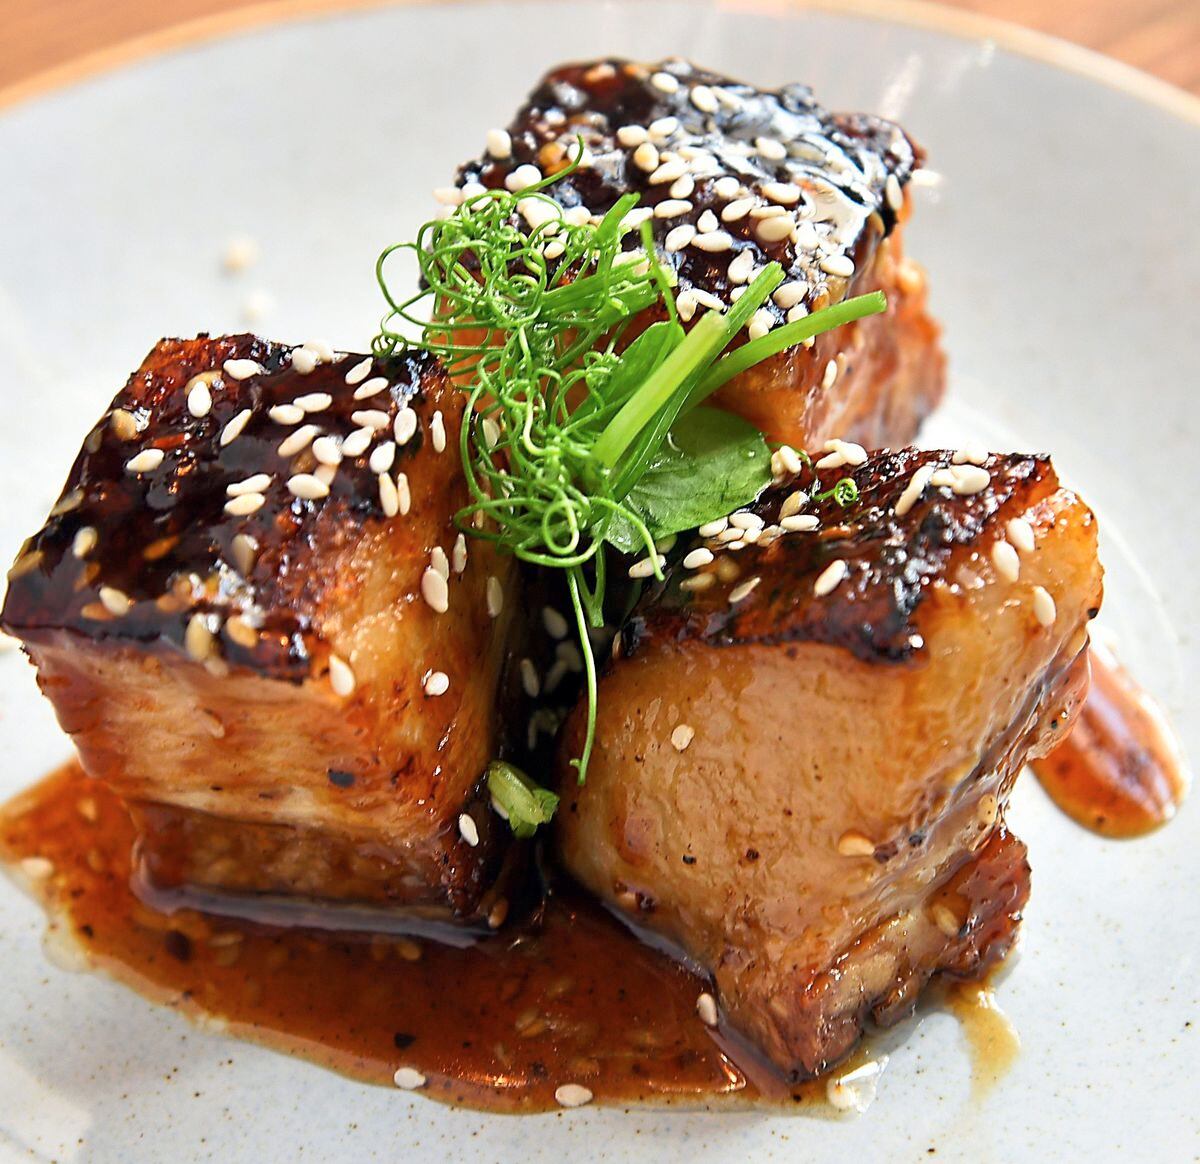 A bit on the side – pork belly cubes